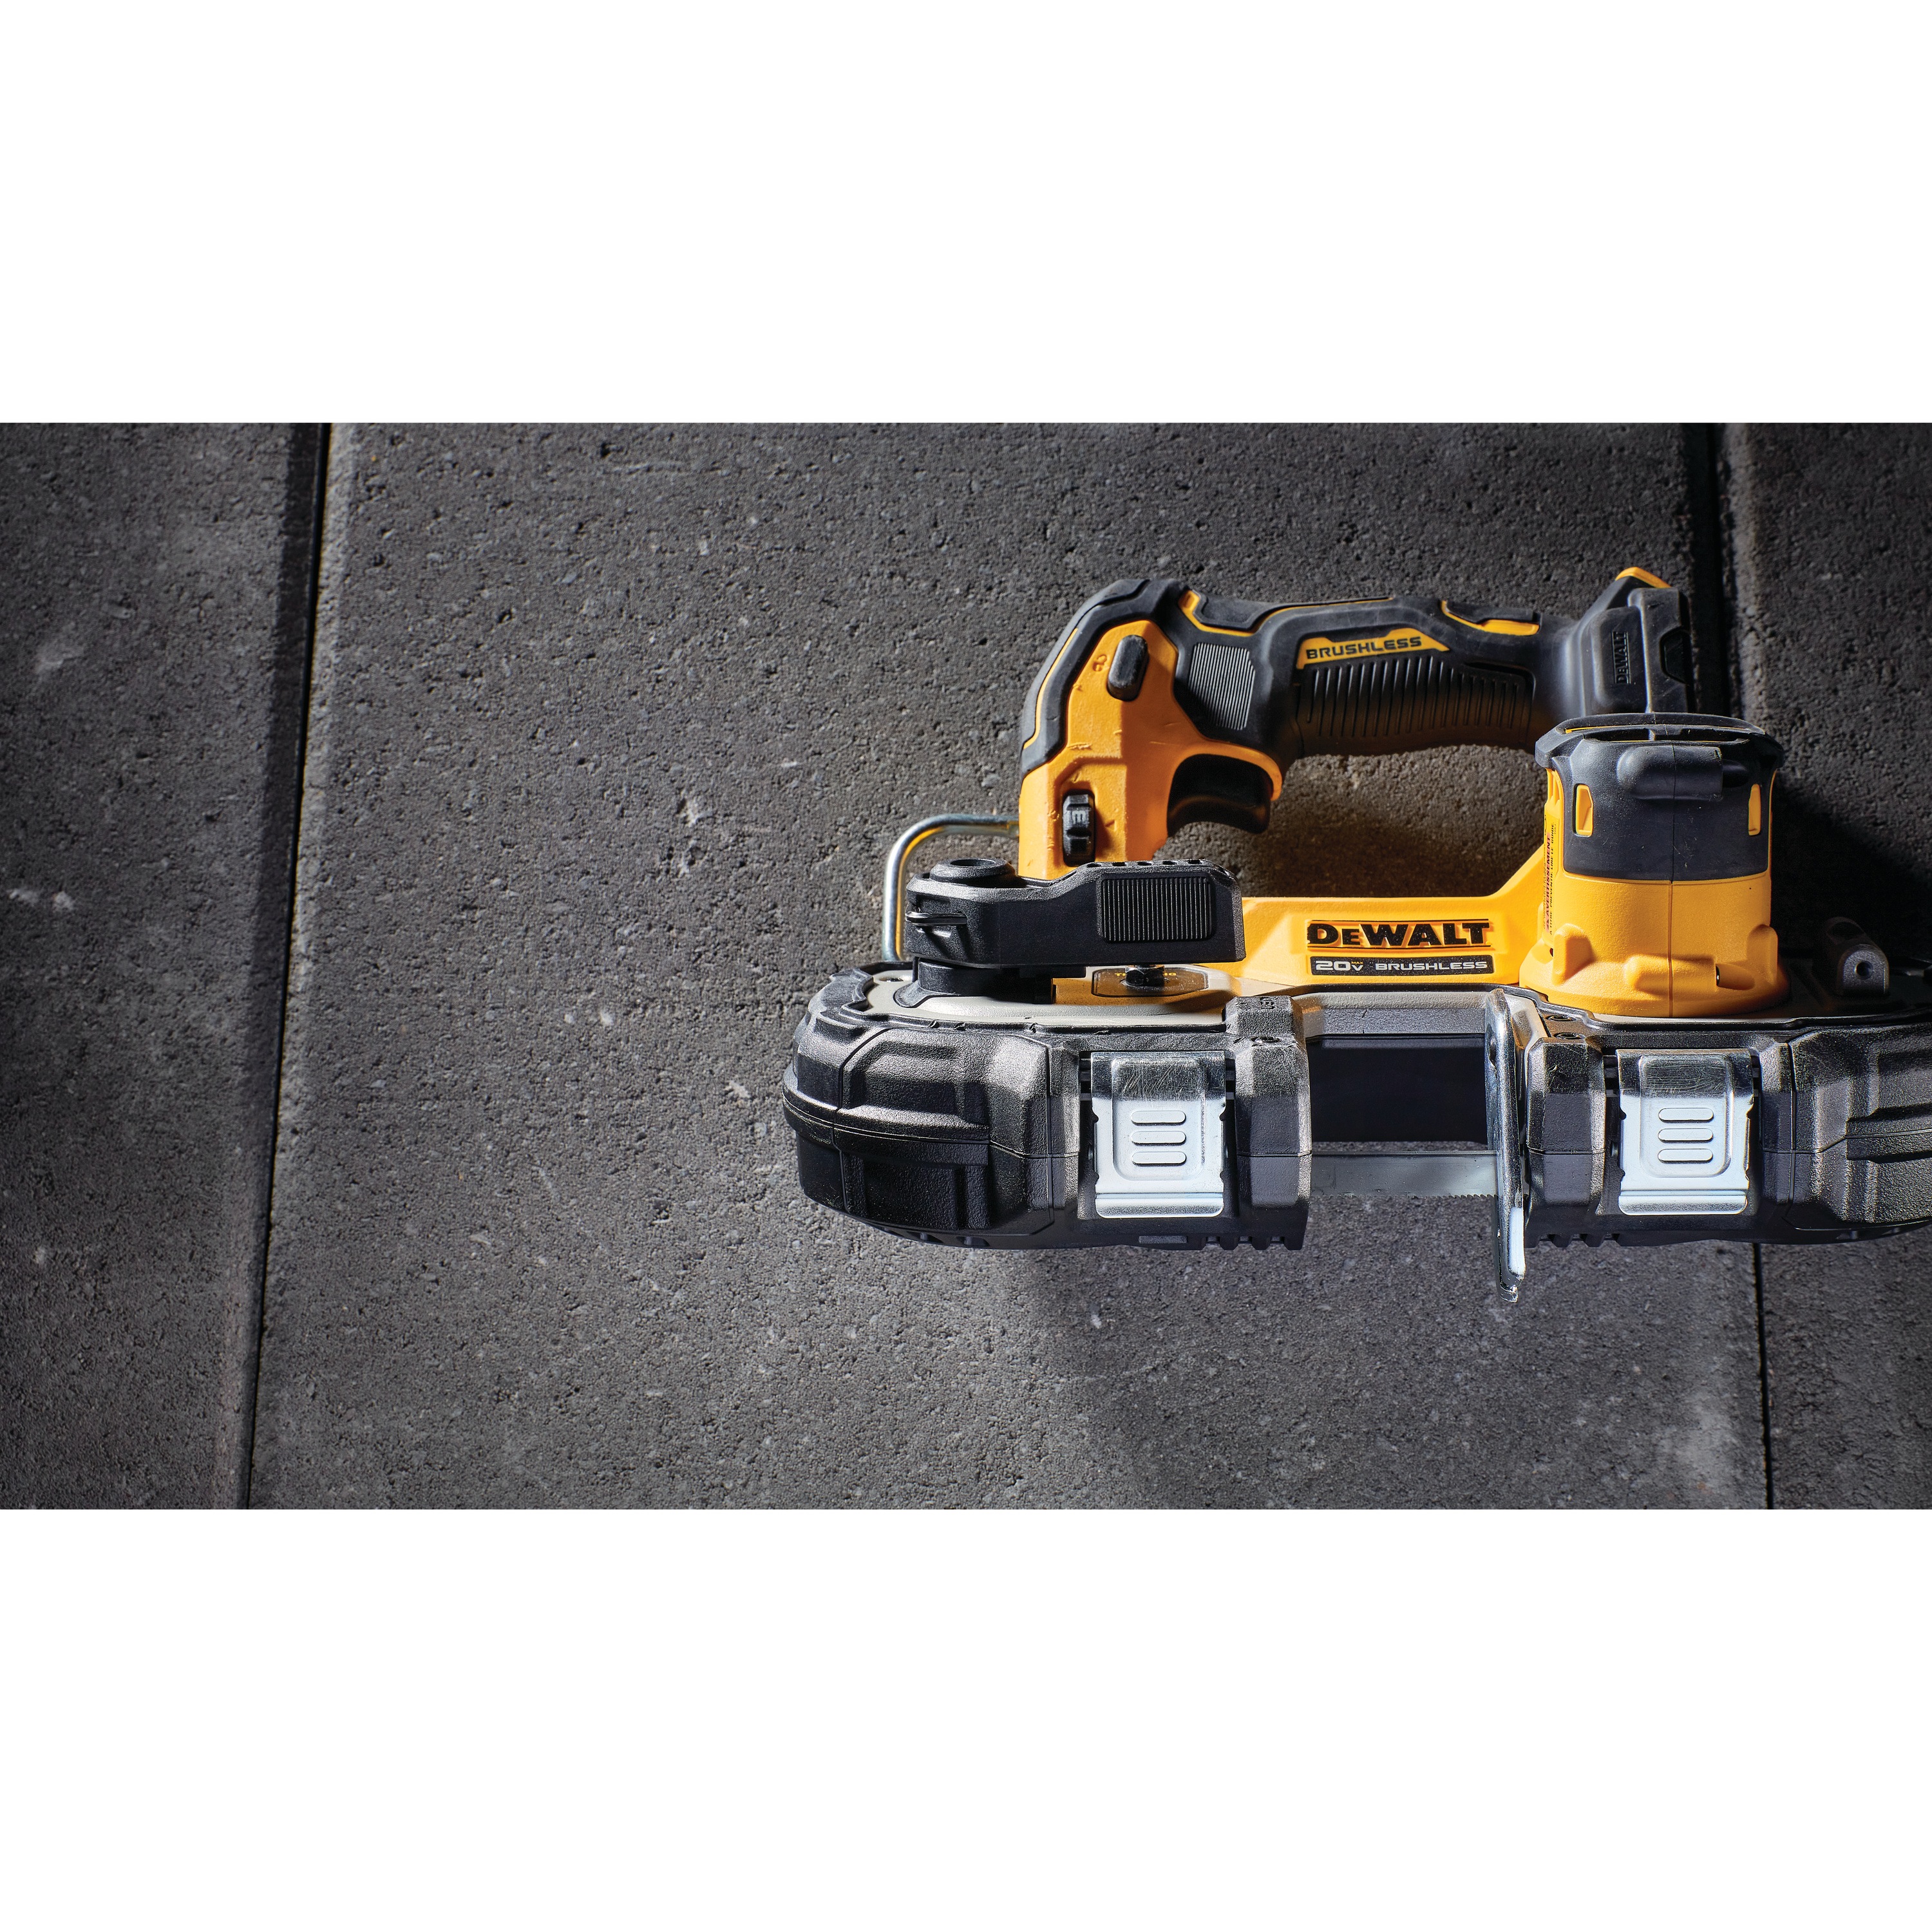 Overhead view of Brushless Cordless 1 and 3 quarters inch Compact Bandsaw placed on ground